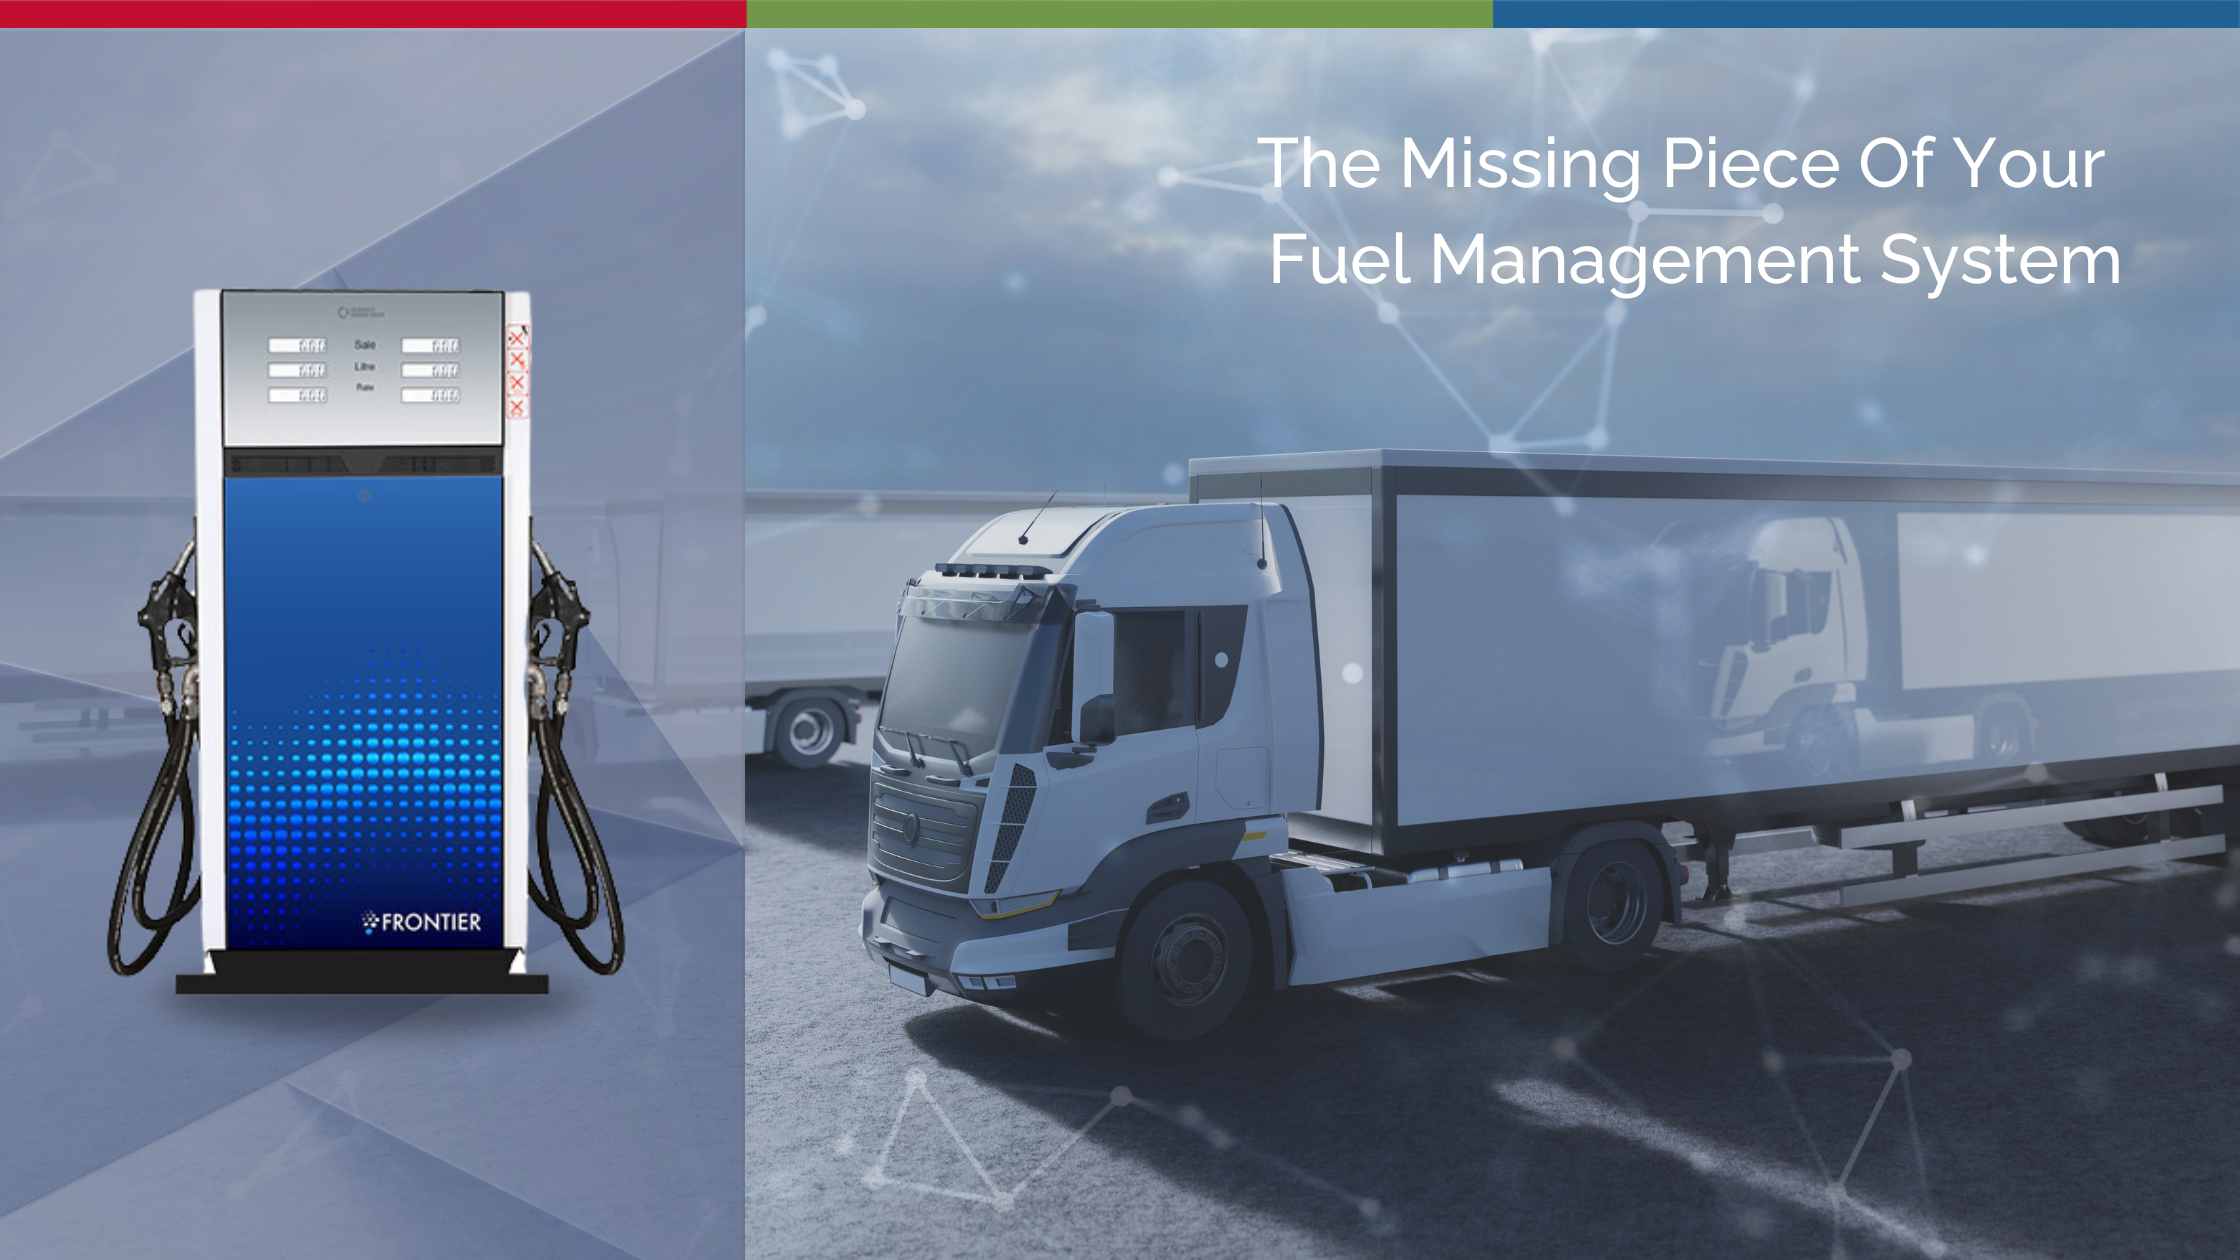 Your site's success lies in its fuel management system. Give yours an upgrade with the Frontier fuel pumps that redefine efficiency and security.